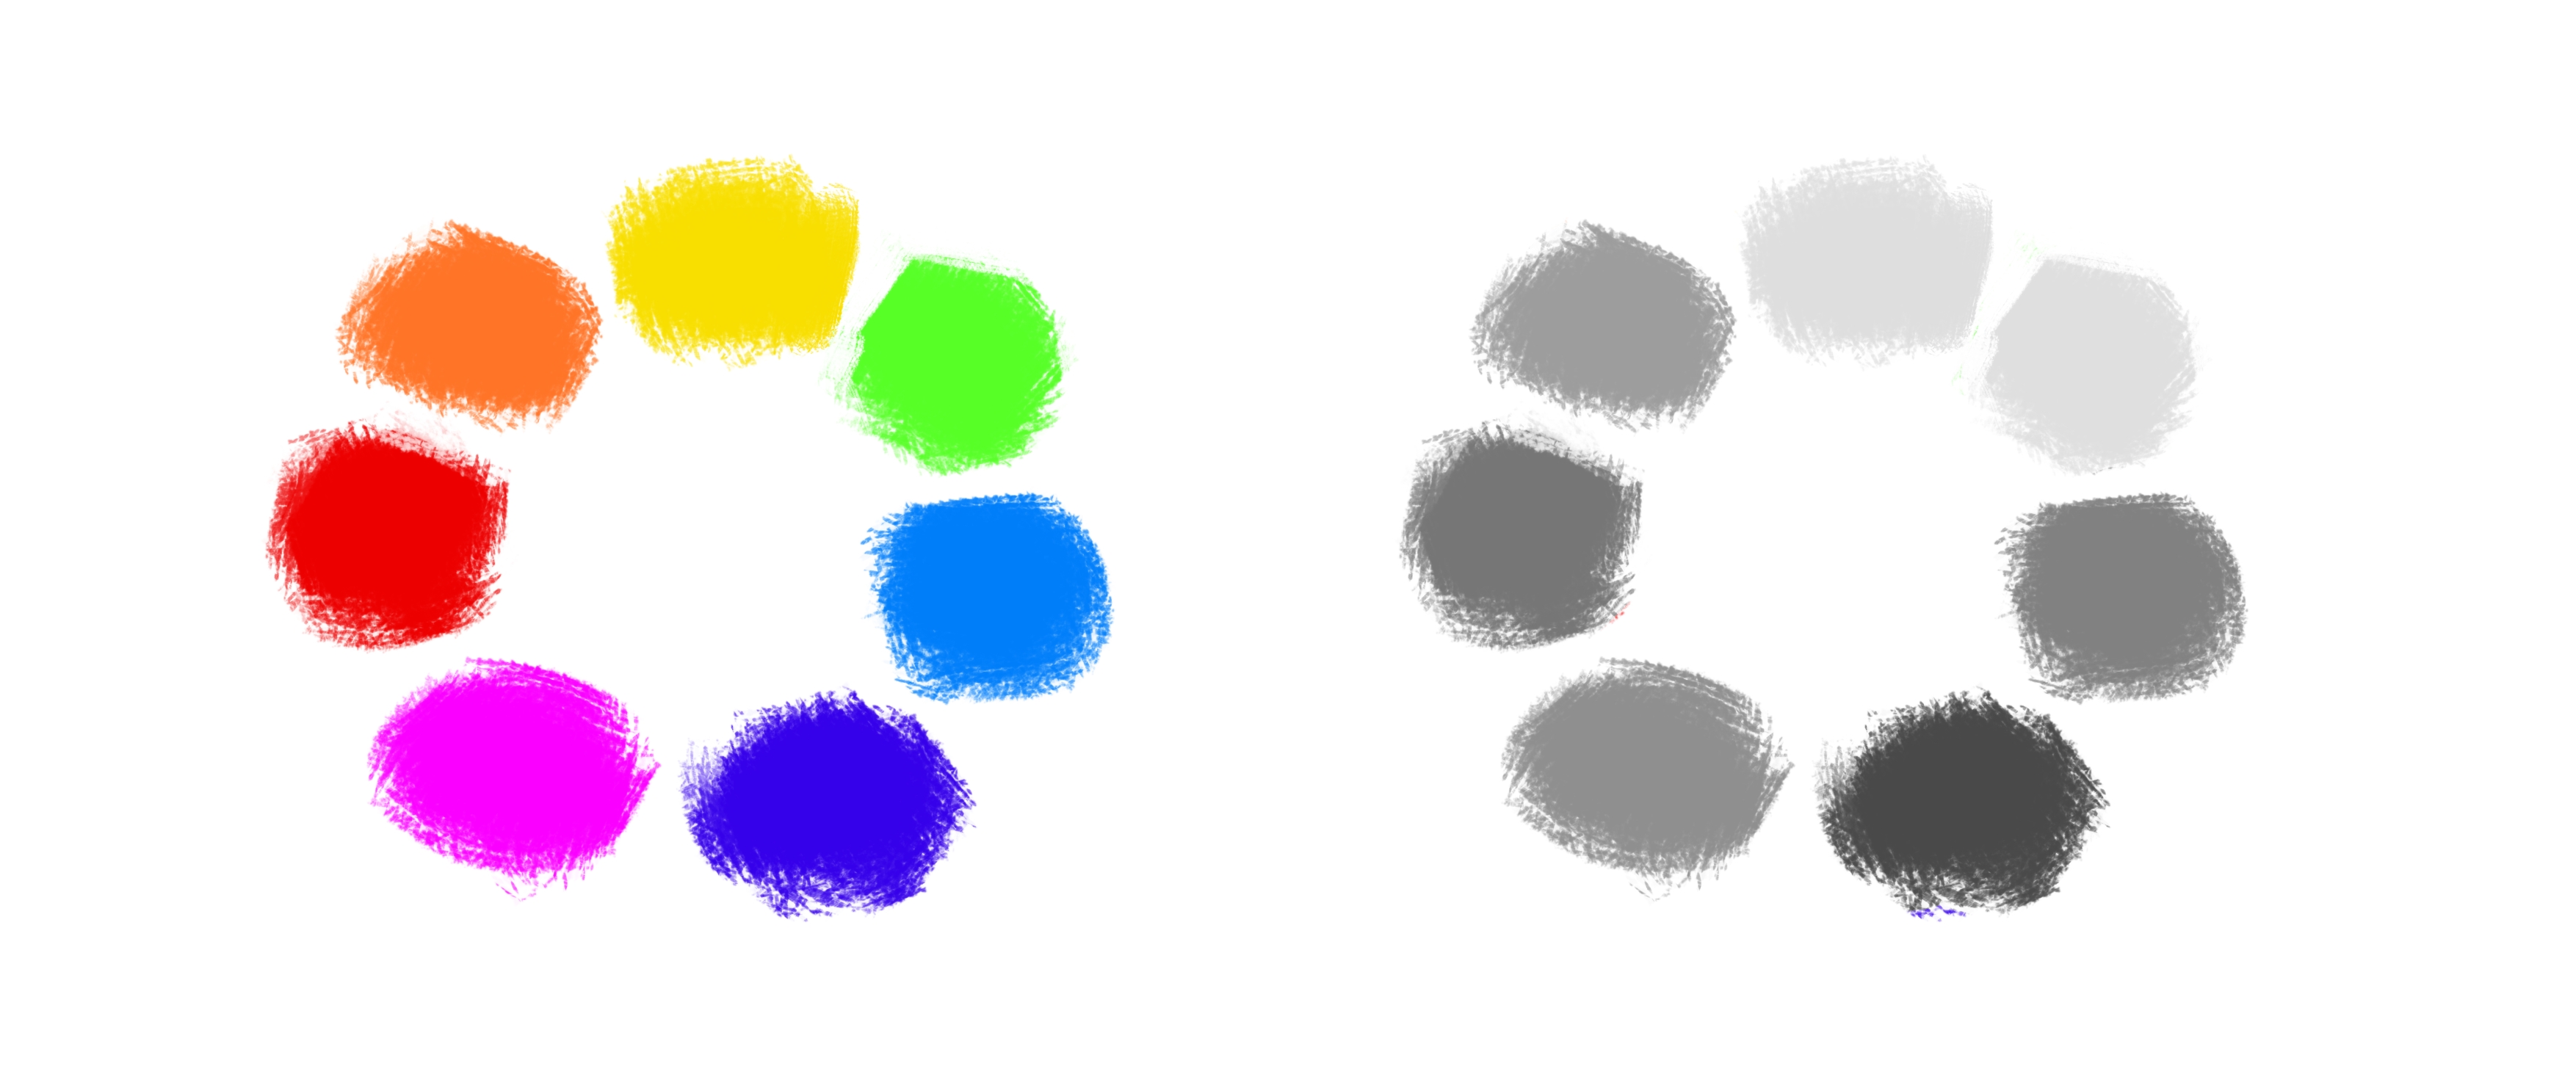 image of a color wheel, with a greyscale version besides